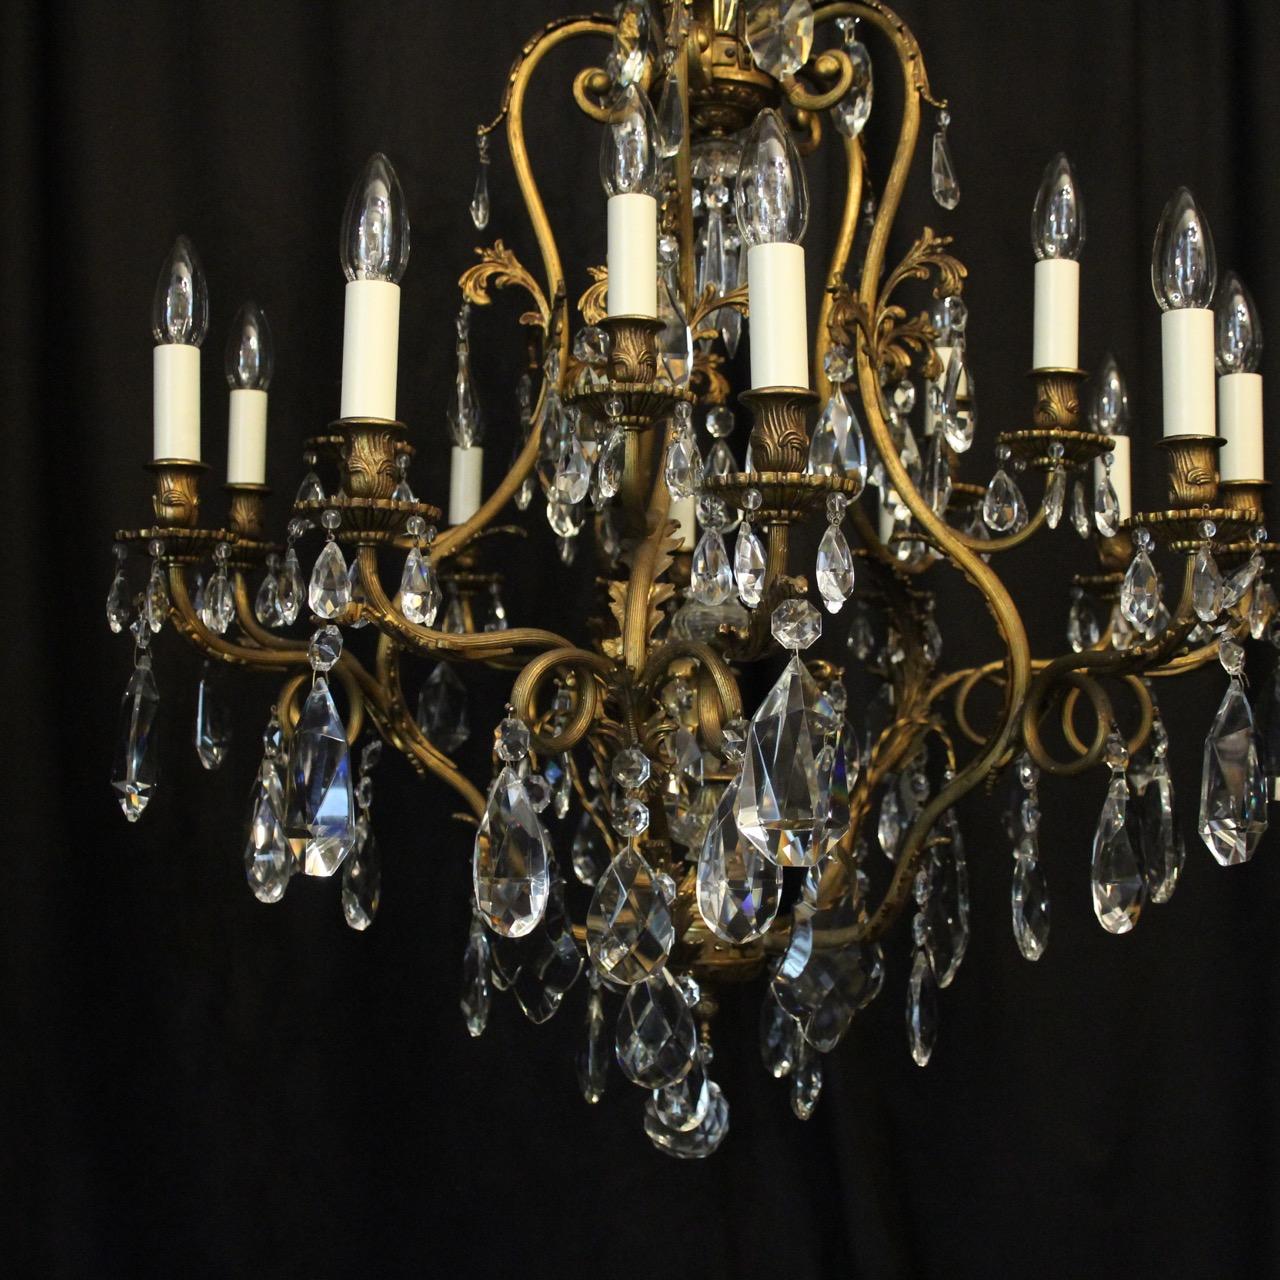 A French gilded bronze and crystal 16 light birdcage form antique chandelier, the fifteen reeded leaf clad scrolling arms with circular bobeche drip pans and bulbous candle sconces, issuing from a foliated cage form interior with a single inverted